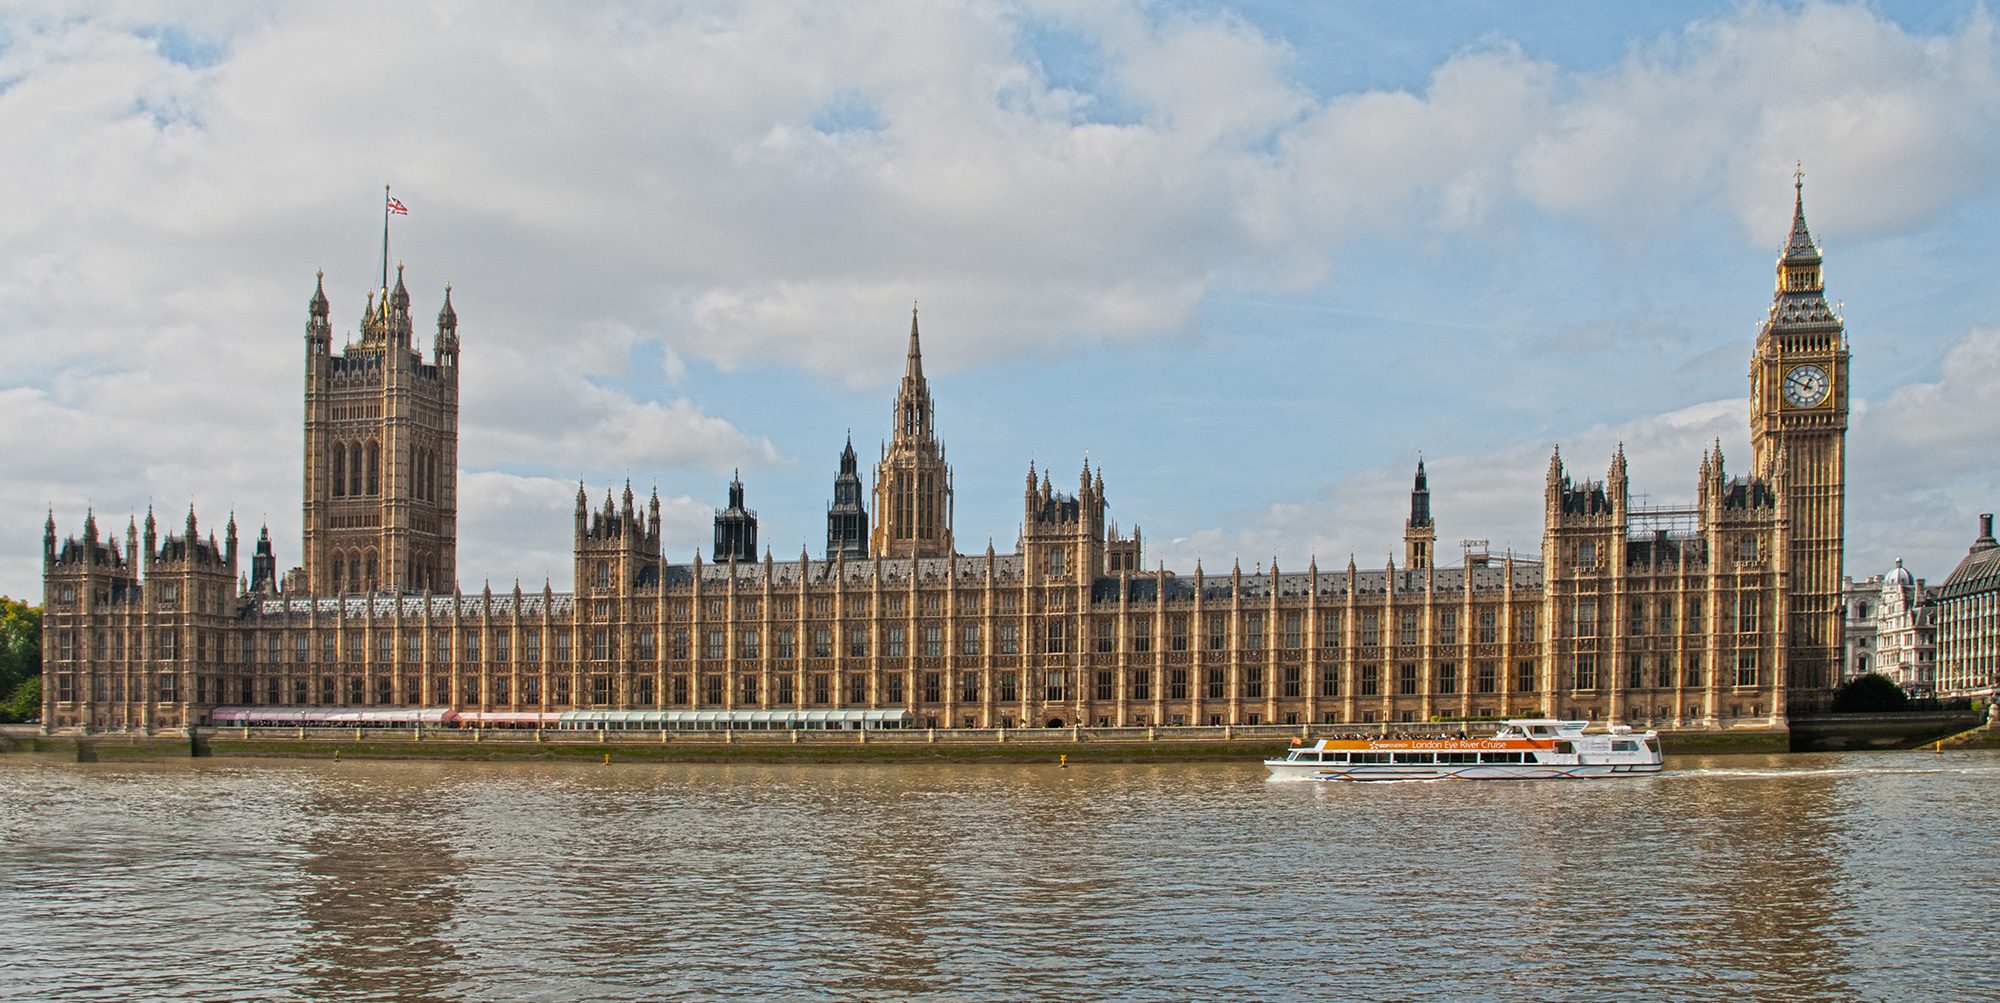 UK Parliament as seen from outside